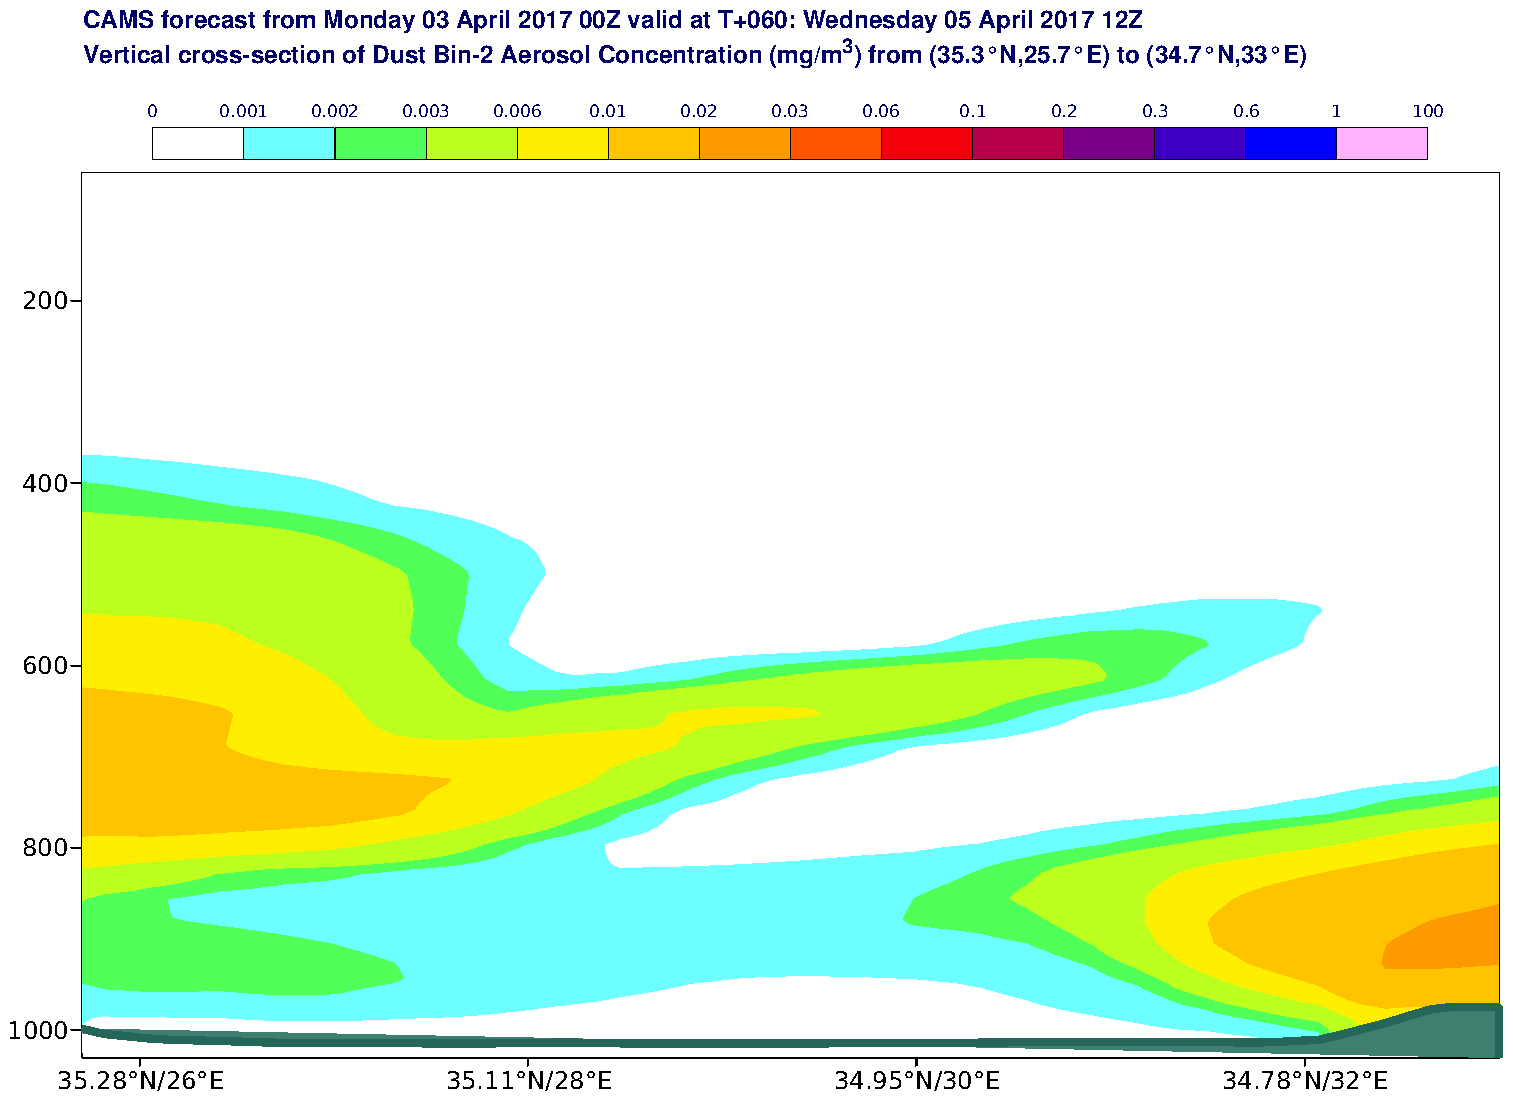 Vertical cross-section of Dust Bin-2 Aerosol Concentration (mg/m3) valid at T60 - 2017-04-05 12:00